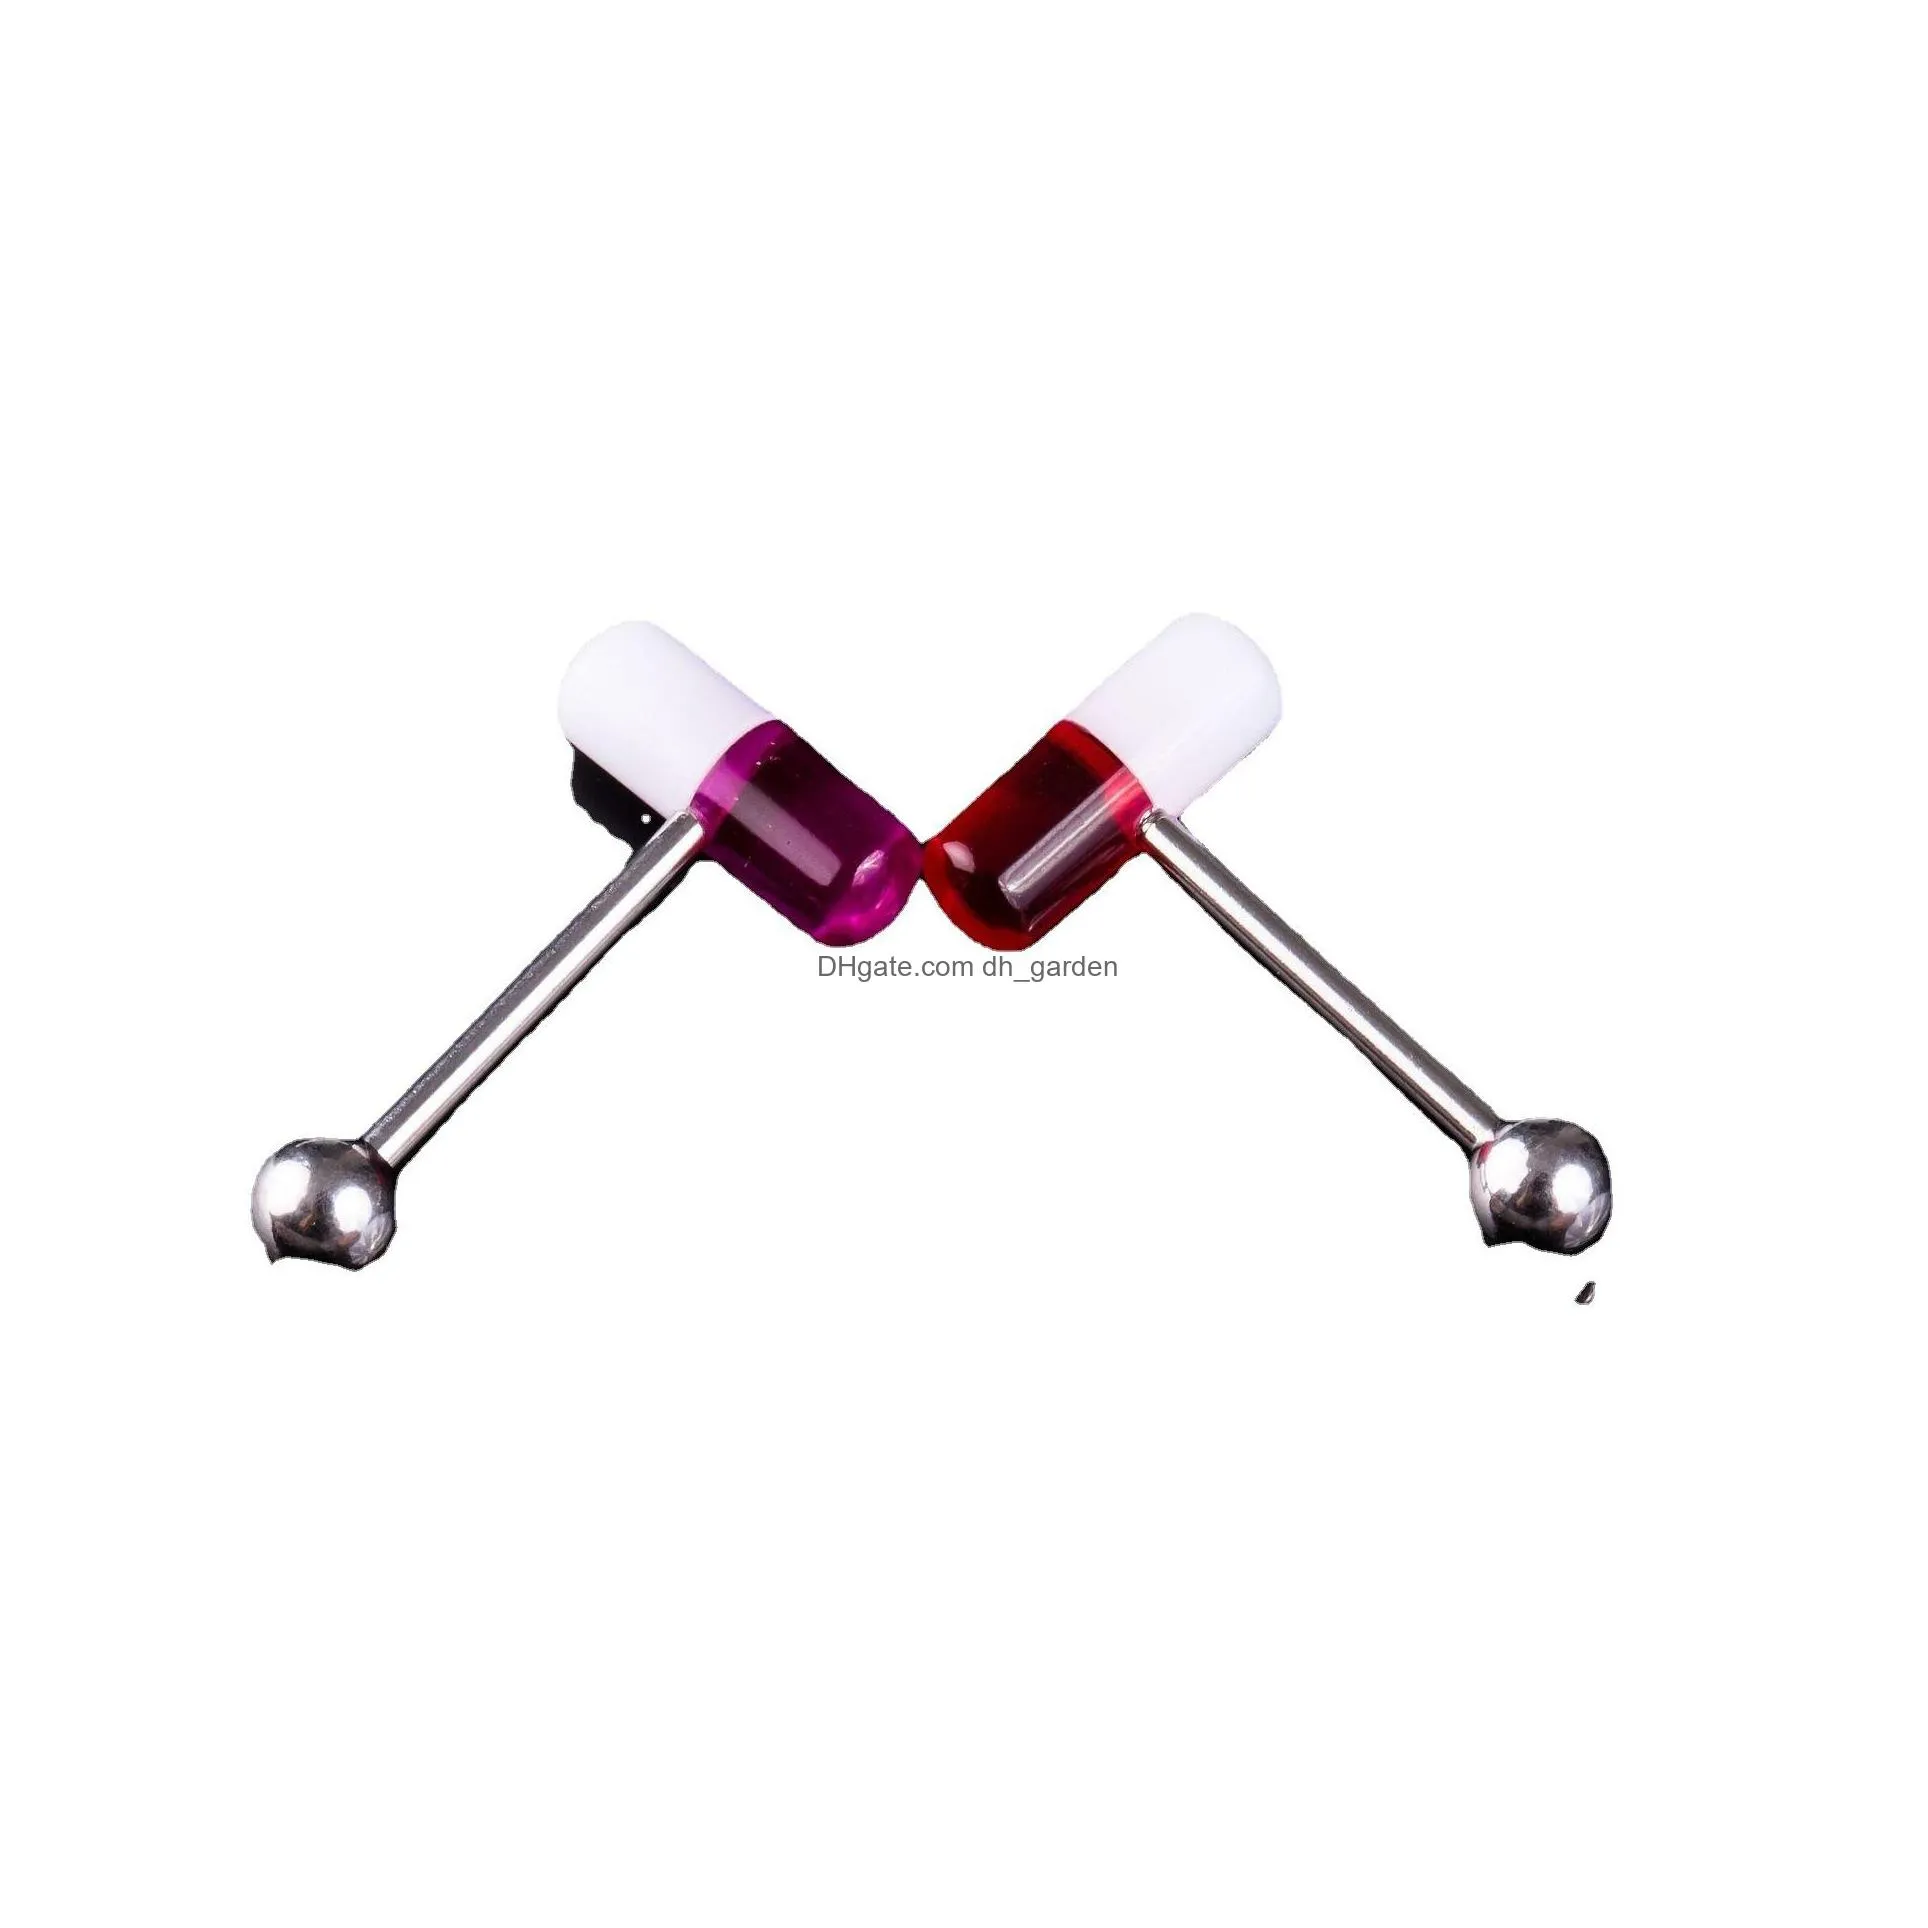 fashion stainless steel acrylic pill hiphop/rock geometric tongue rings body piercing jewelry